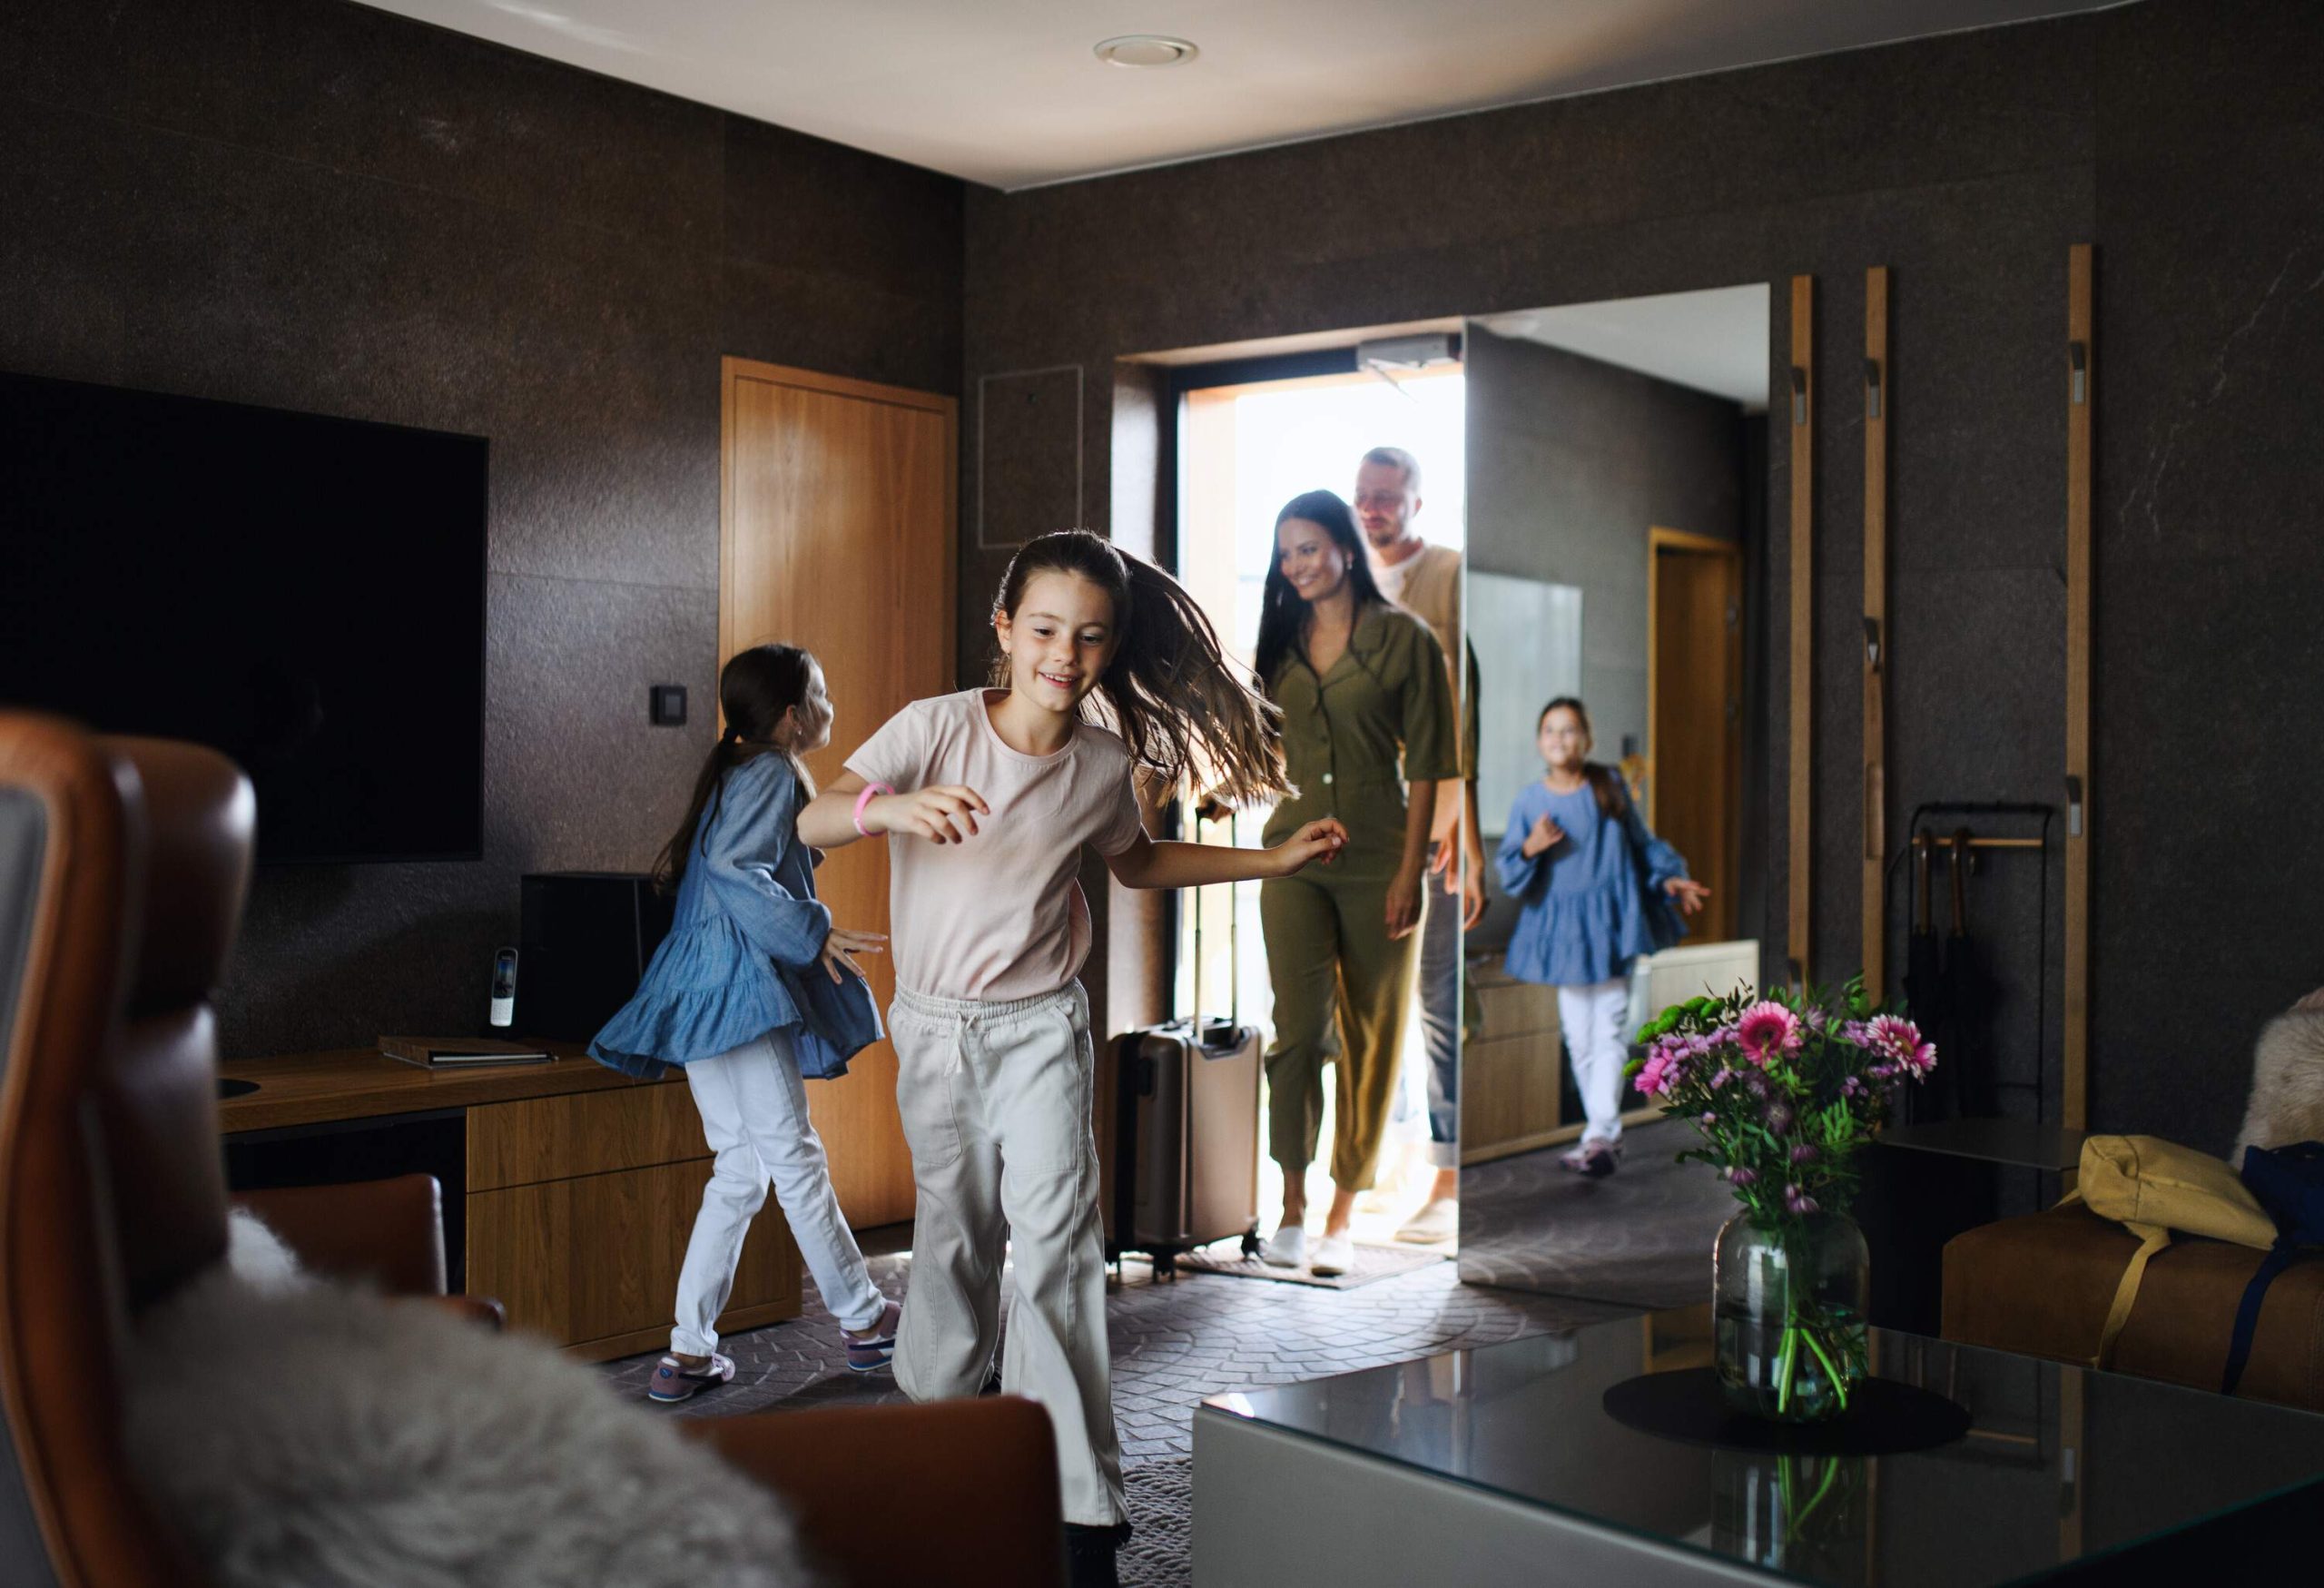 theme_travel_vacation_holiday_hotel_room_people_family_gettyimages-1353988118